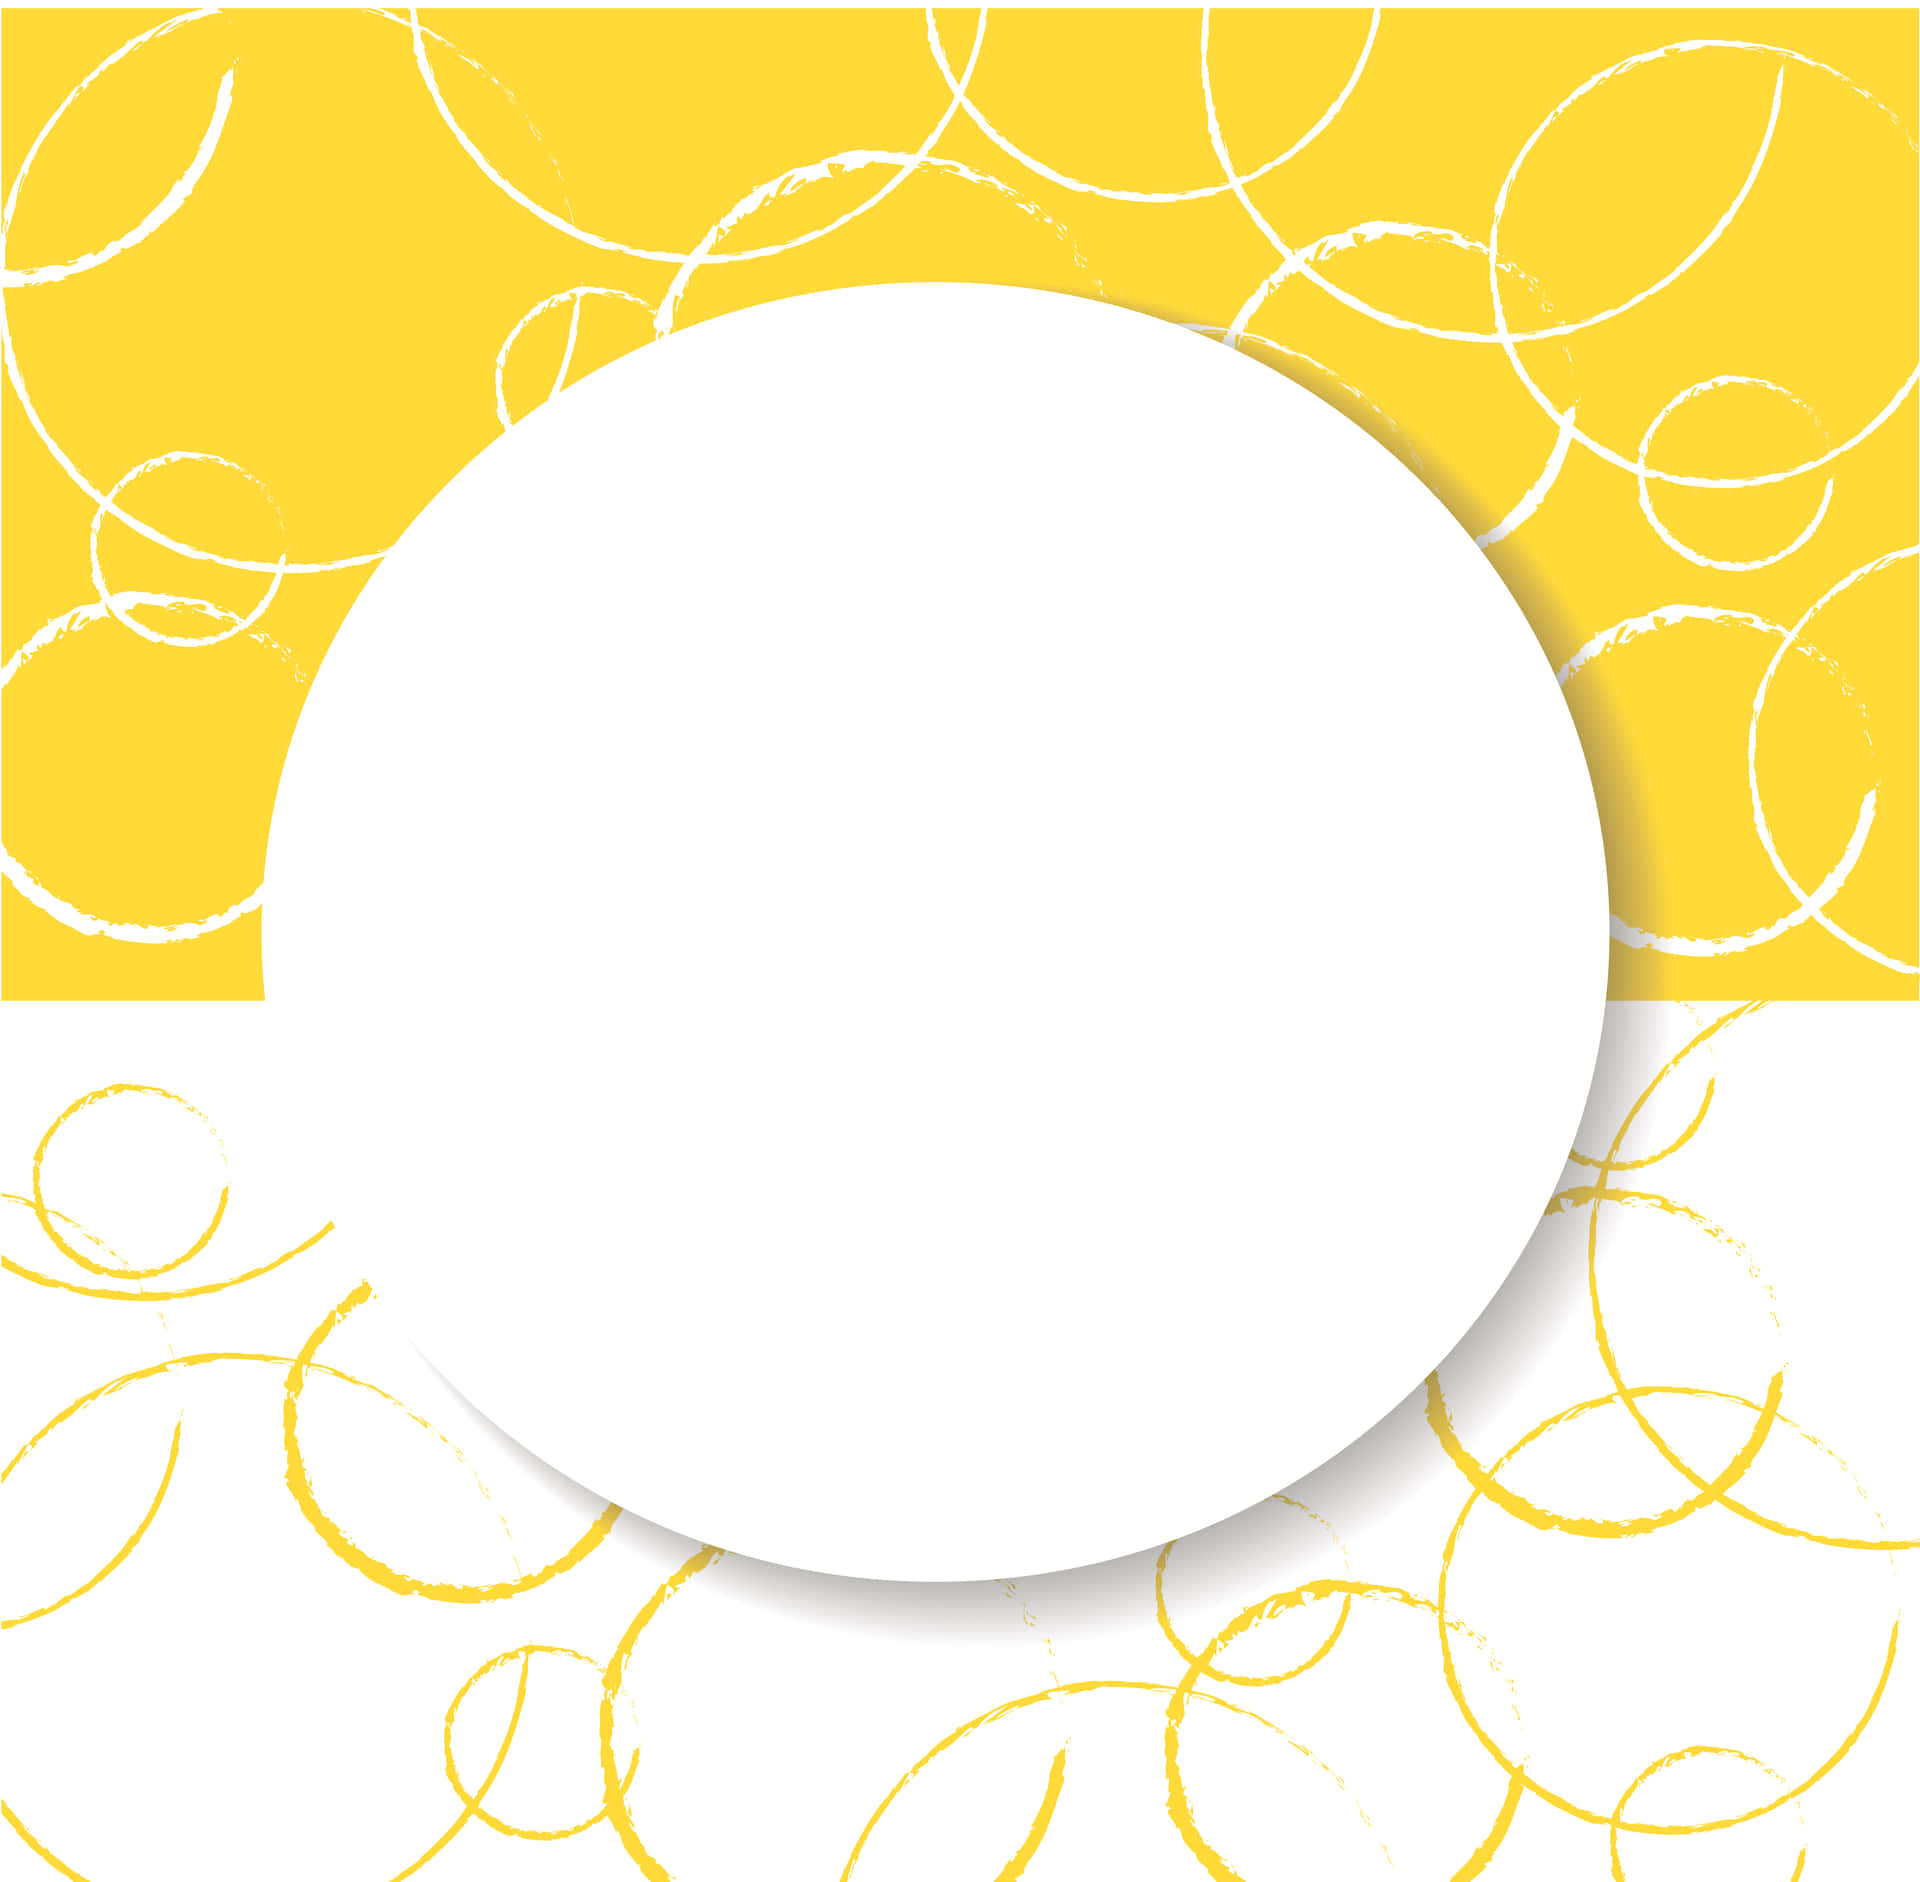 Vibrant Yellow Circle on Gradient Background Wallpaper